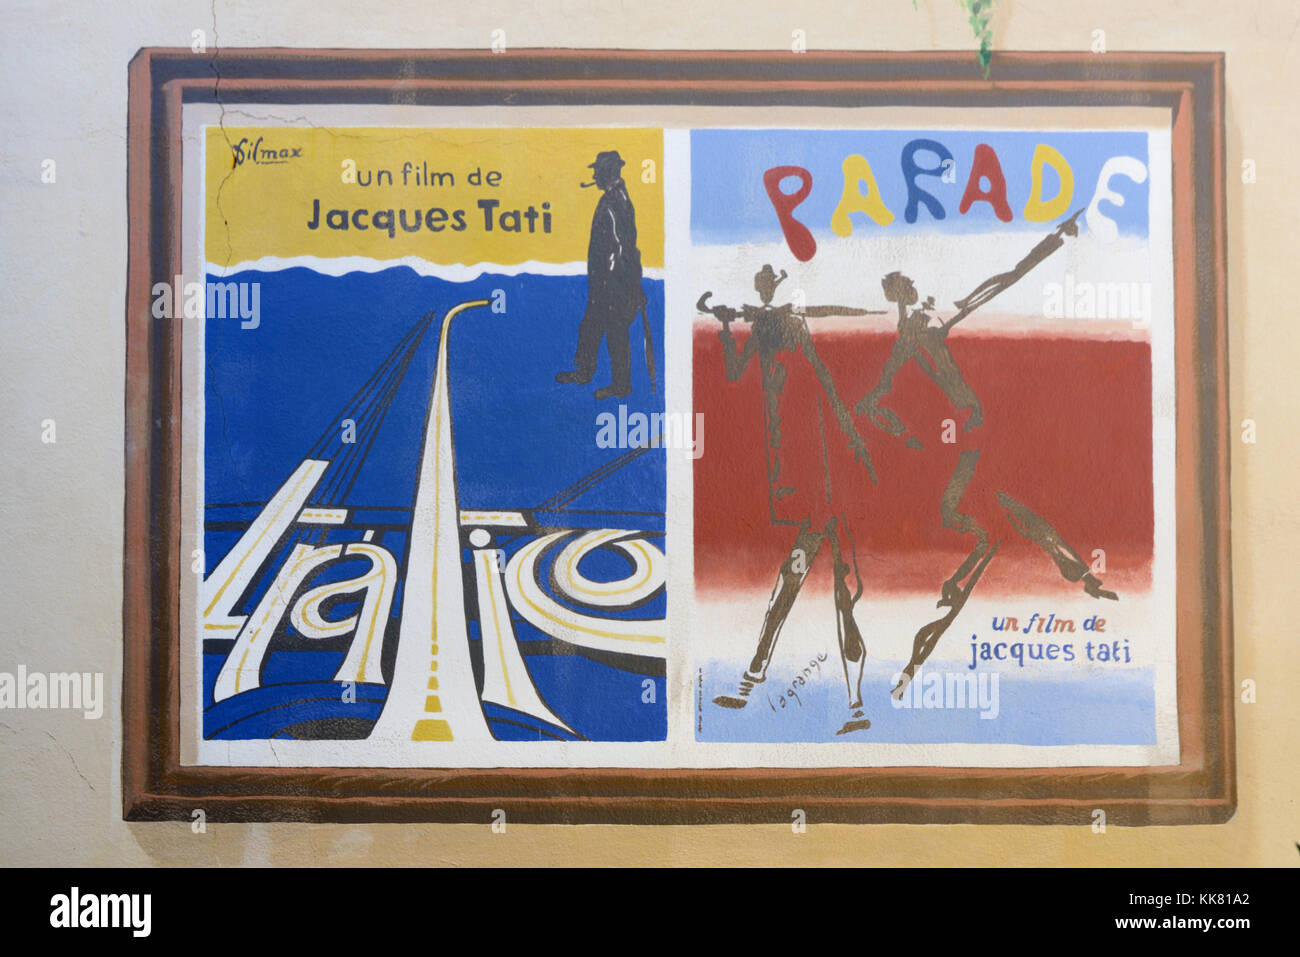 Wall Painting or Mural Based on Vintage Jacques Tati Film Posters of the Films 'Traffic' and 'Parade', Cannes, Alpes-Maritimes, France Stock Photo